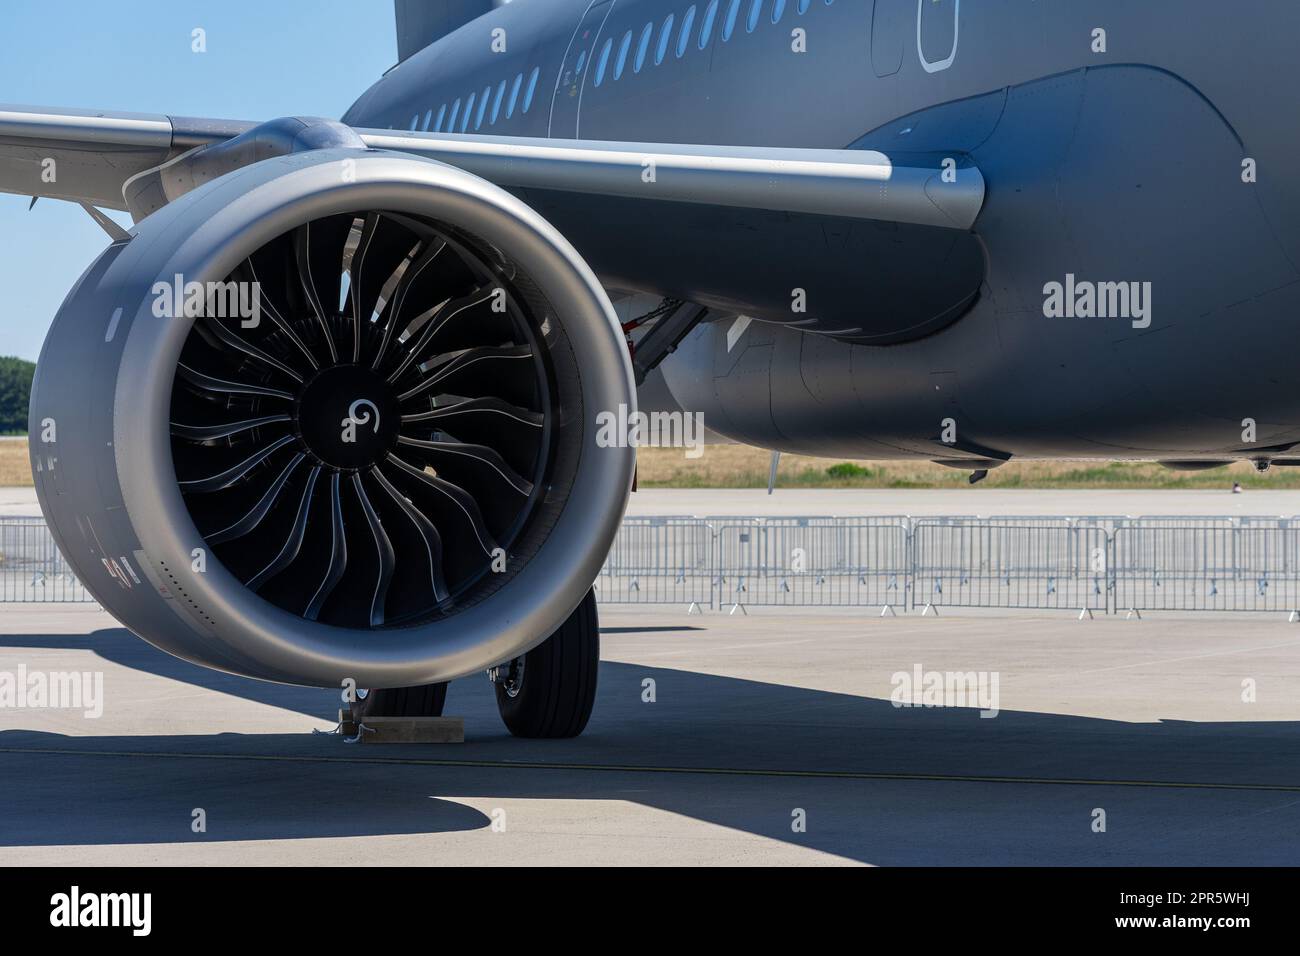 Jet engine, part of the wing and fuselage of a passenger aircraft. Stock Photo